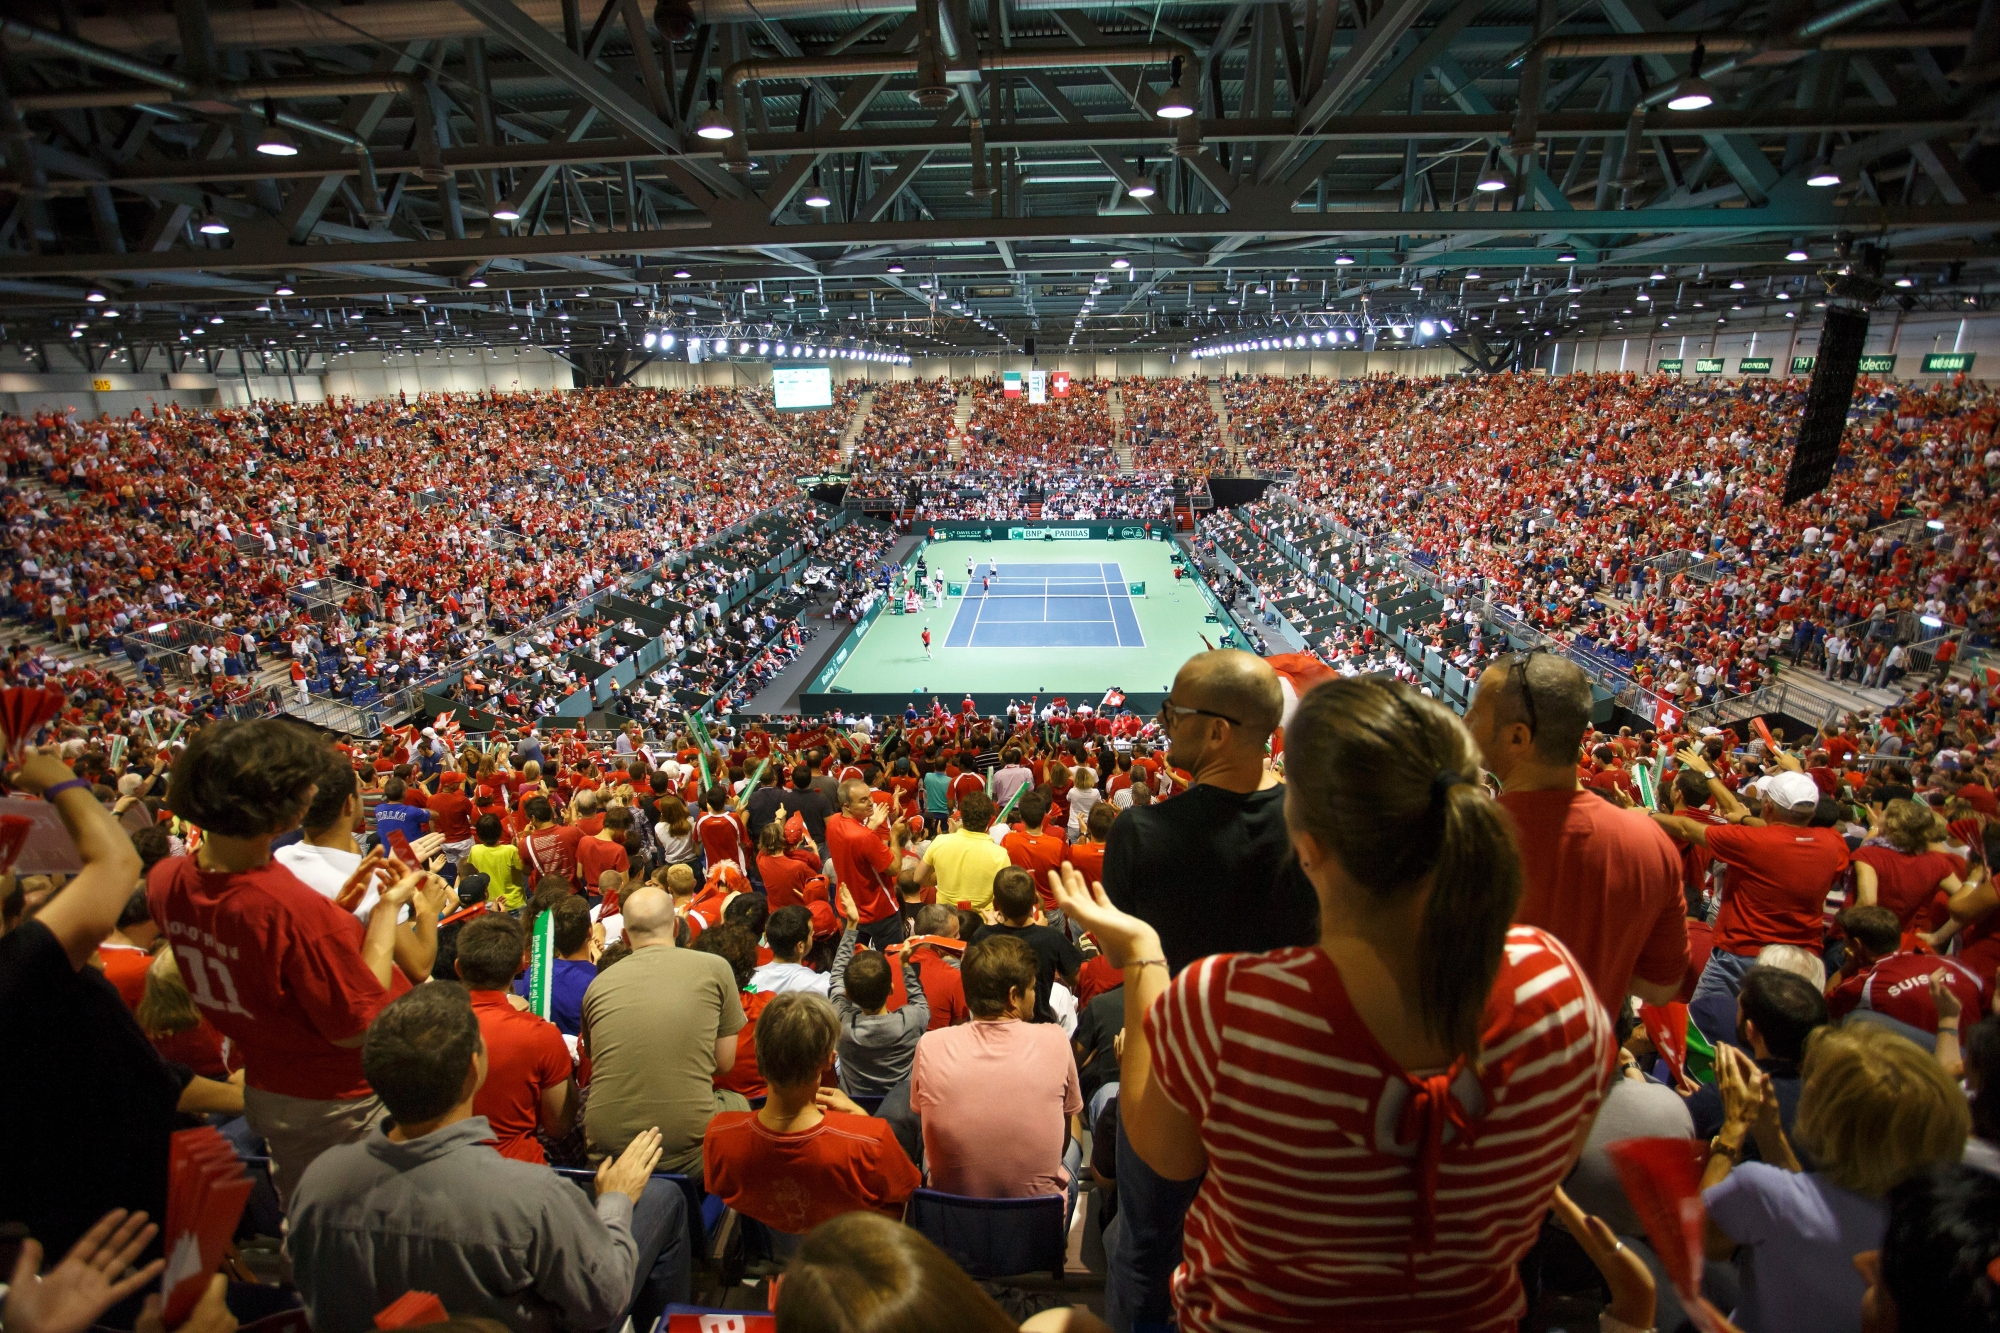 A general view of stadium, during the doubles match of the Davis Cup World Group Semifinal match between Switzerland and Italy, at Palexpo, in Geneva, Switzerland, Saturday, September 13, 2014. (KEYSTONE/Salvatore Di Nolfi)coupe davis TENNIS DAVIS CUP 2014 CHE ITA